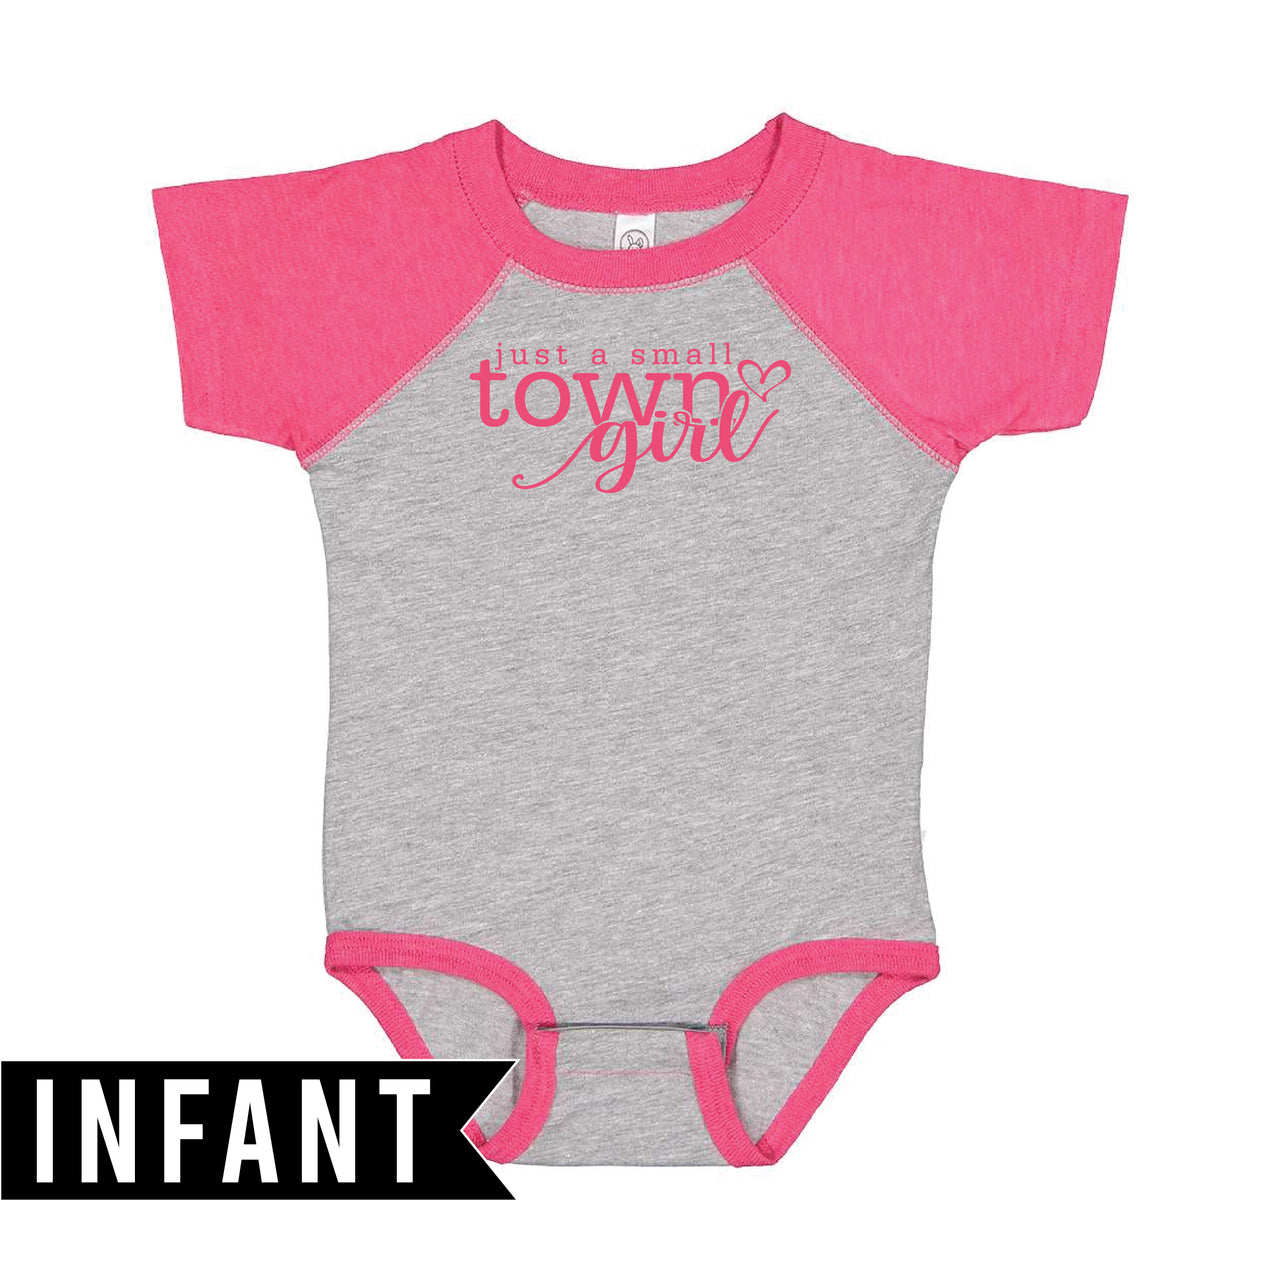 Infant Baseball Fine Jersey Bodysuit - Indiana Small Town